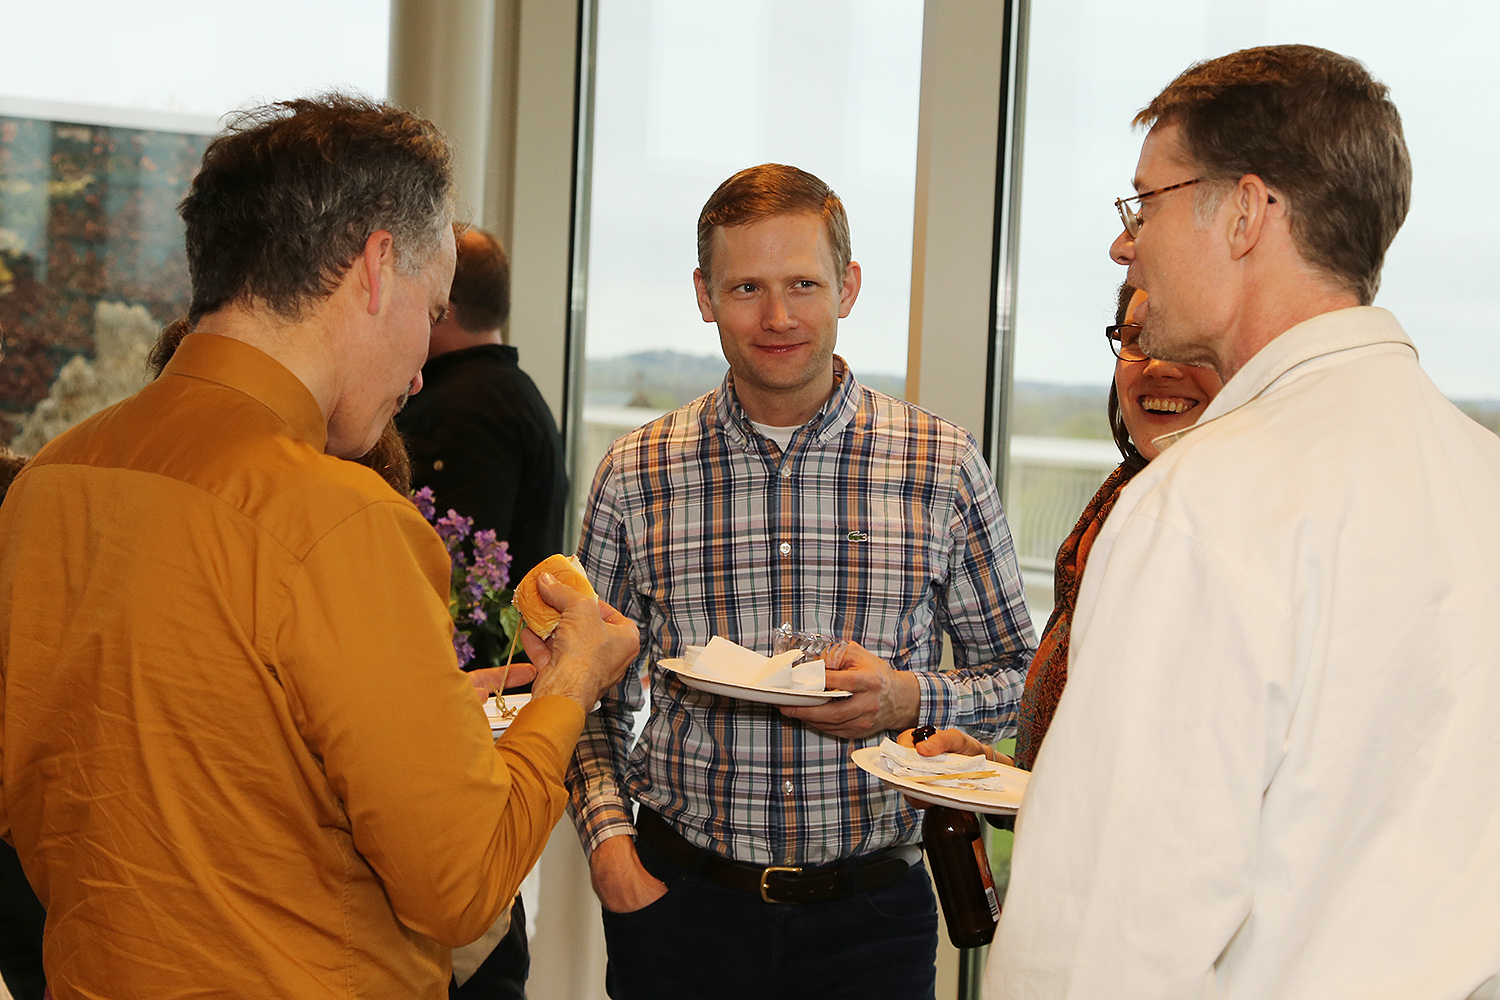 Attendees continued their conversation at a reception following the event. (Photos by Richard Marinelli)